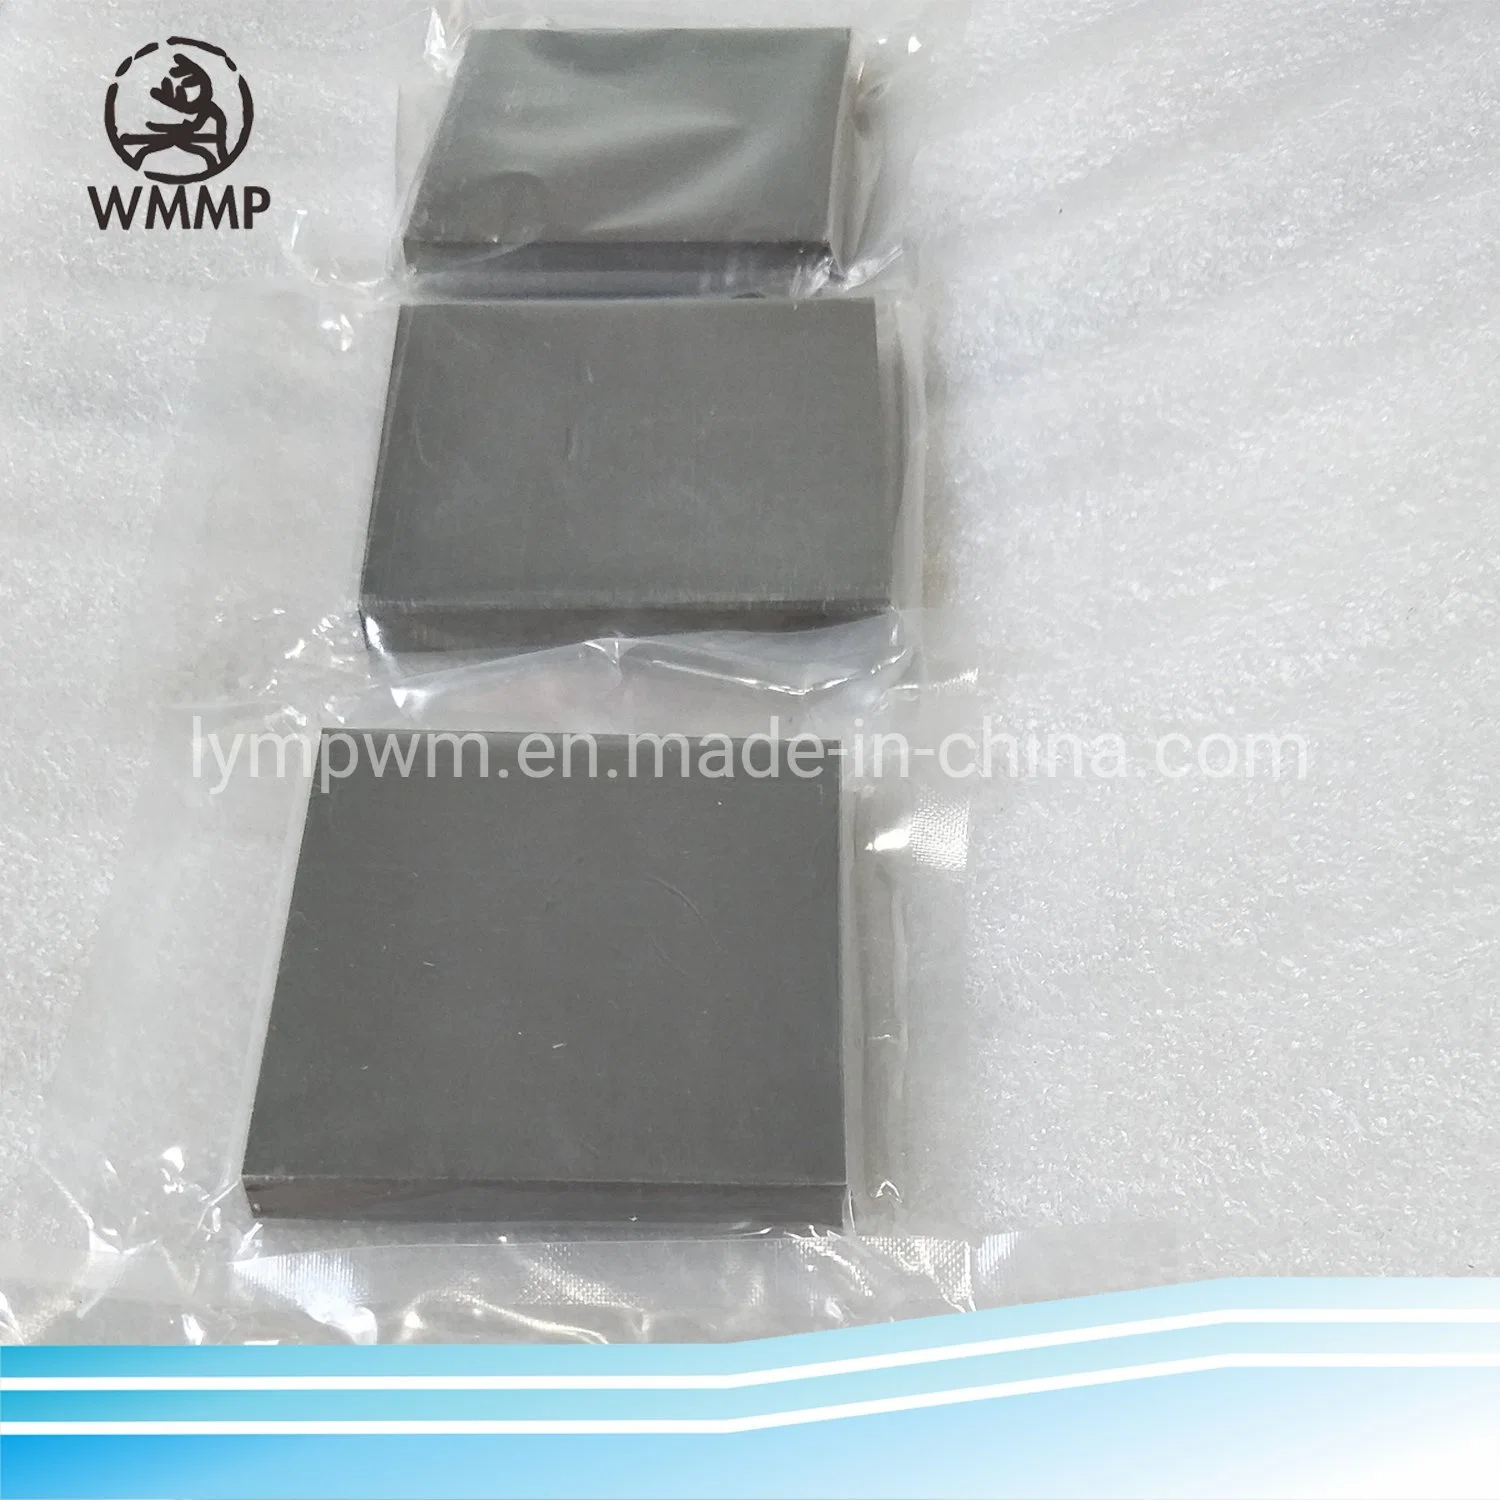 Hot Rolled Thickness1mm&2mm Molybdenum Plates&Molybdenum Alloy Plates in Industry